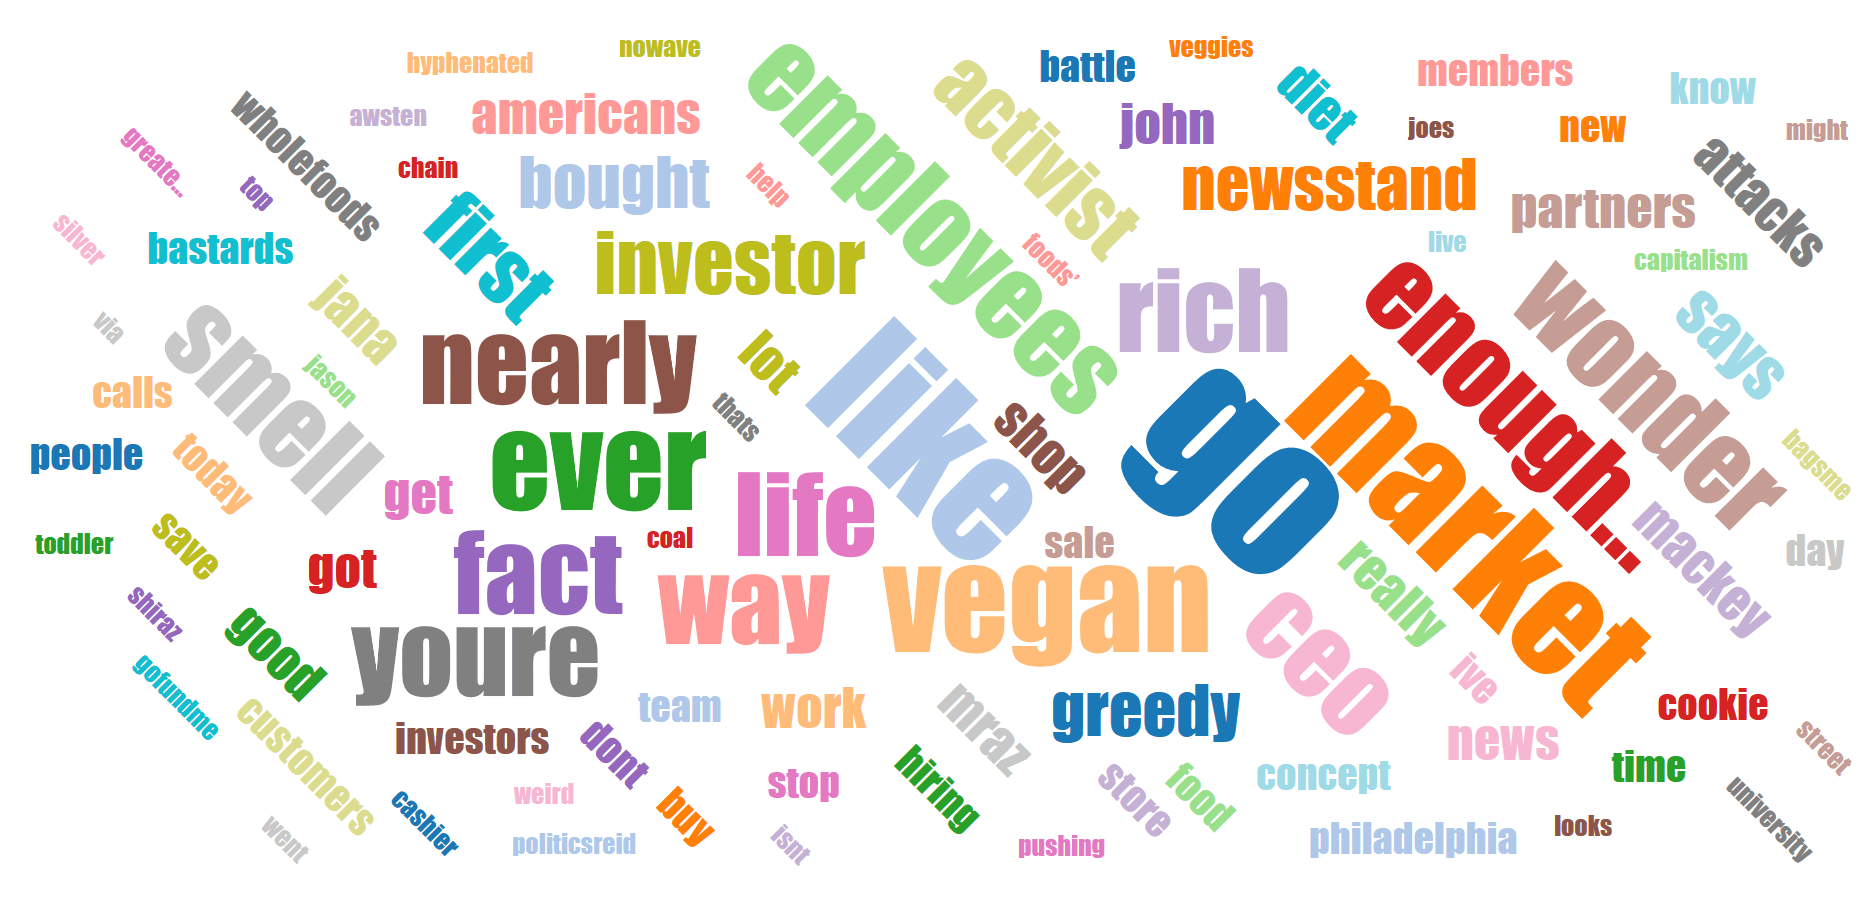 Word cloud with "go" featured the largest followed by "like", "market", "enough", and "vegan"